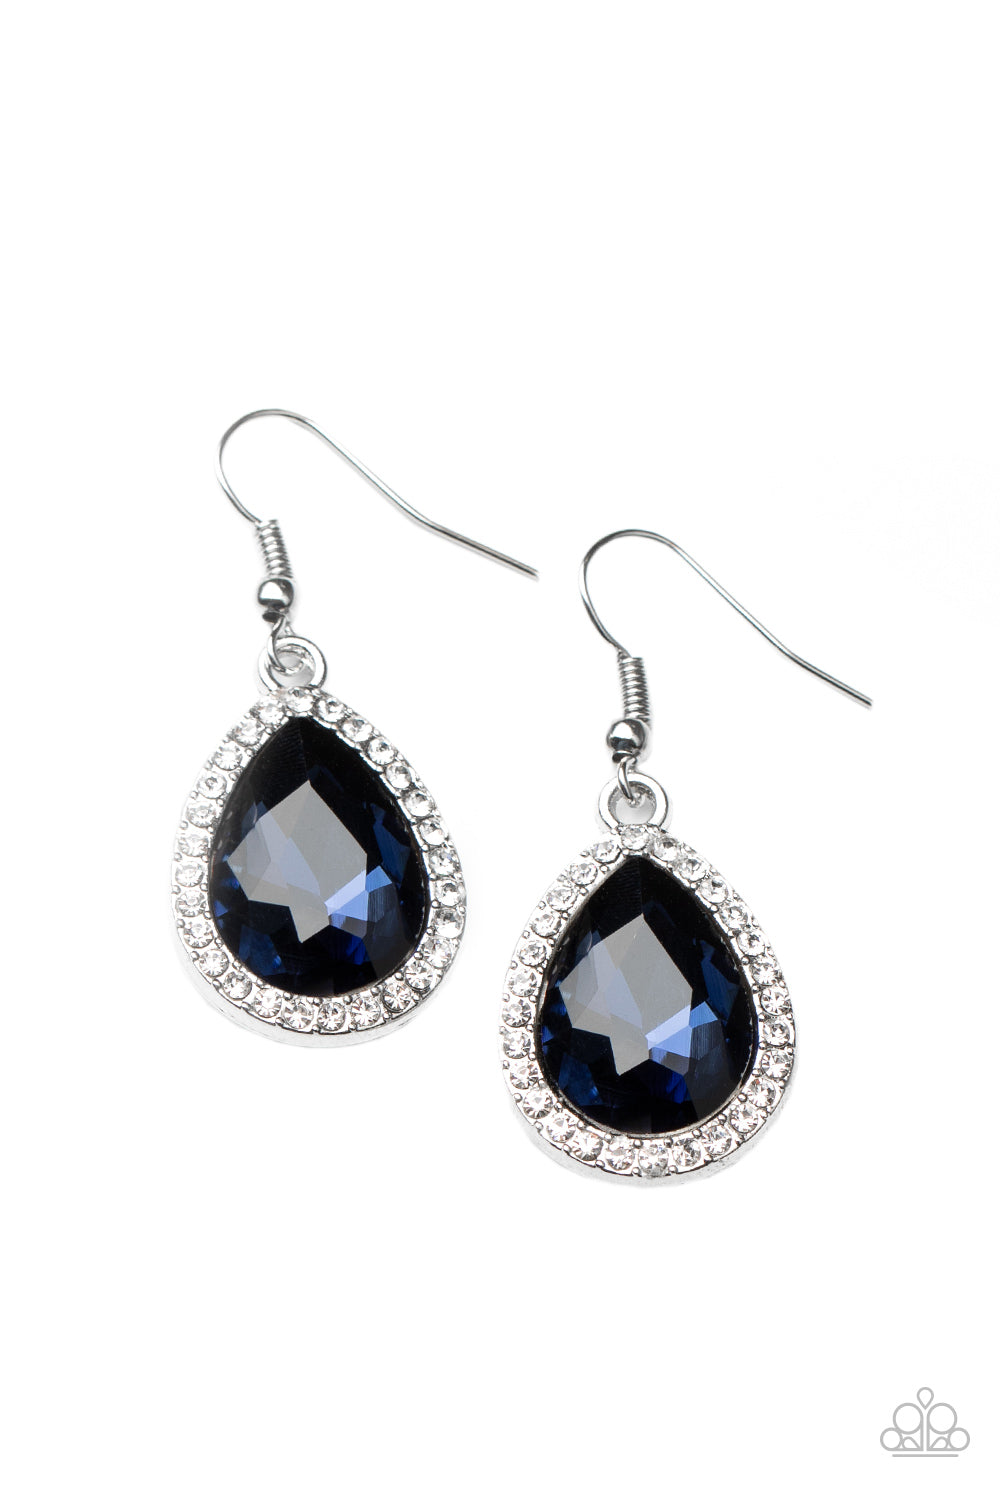 Dripping With Drama - Blue Earrings - Paparazzi Accessories